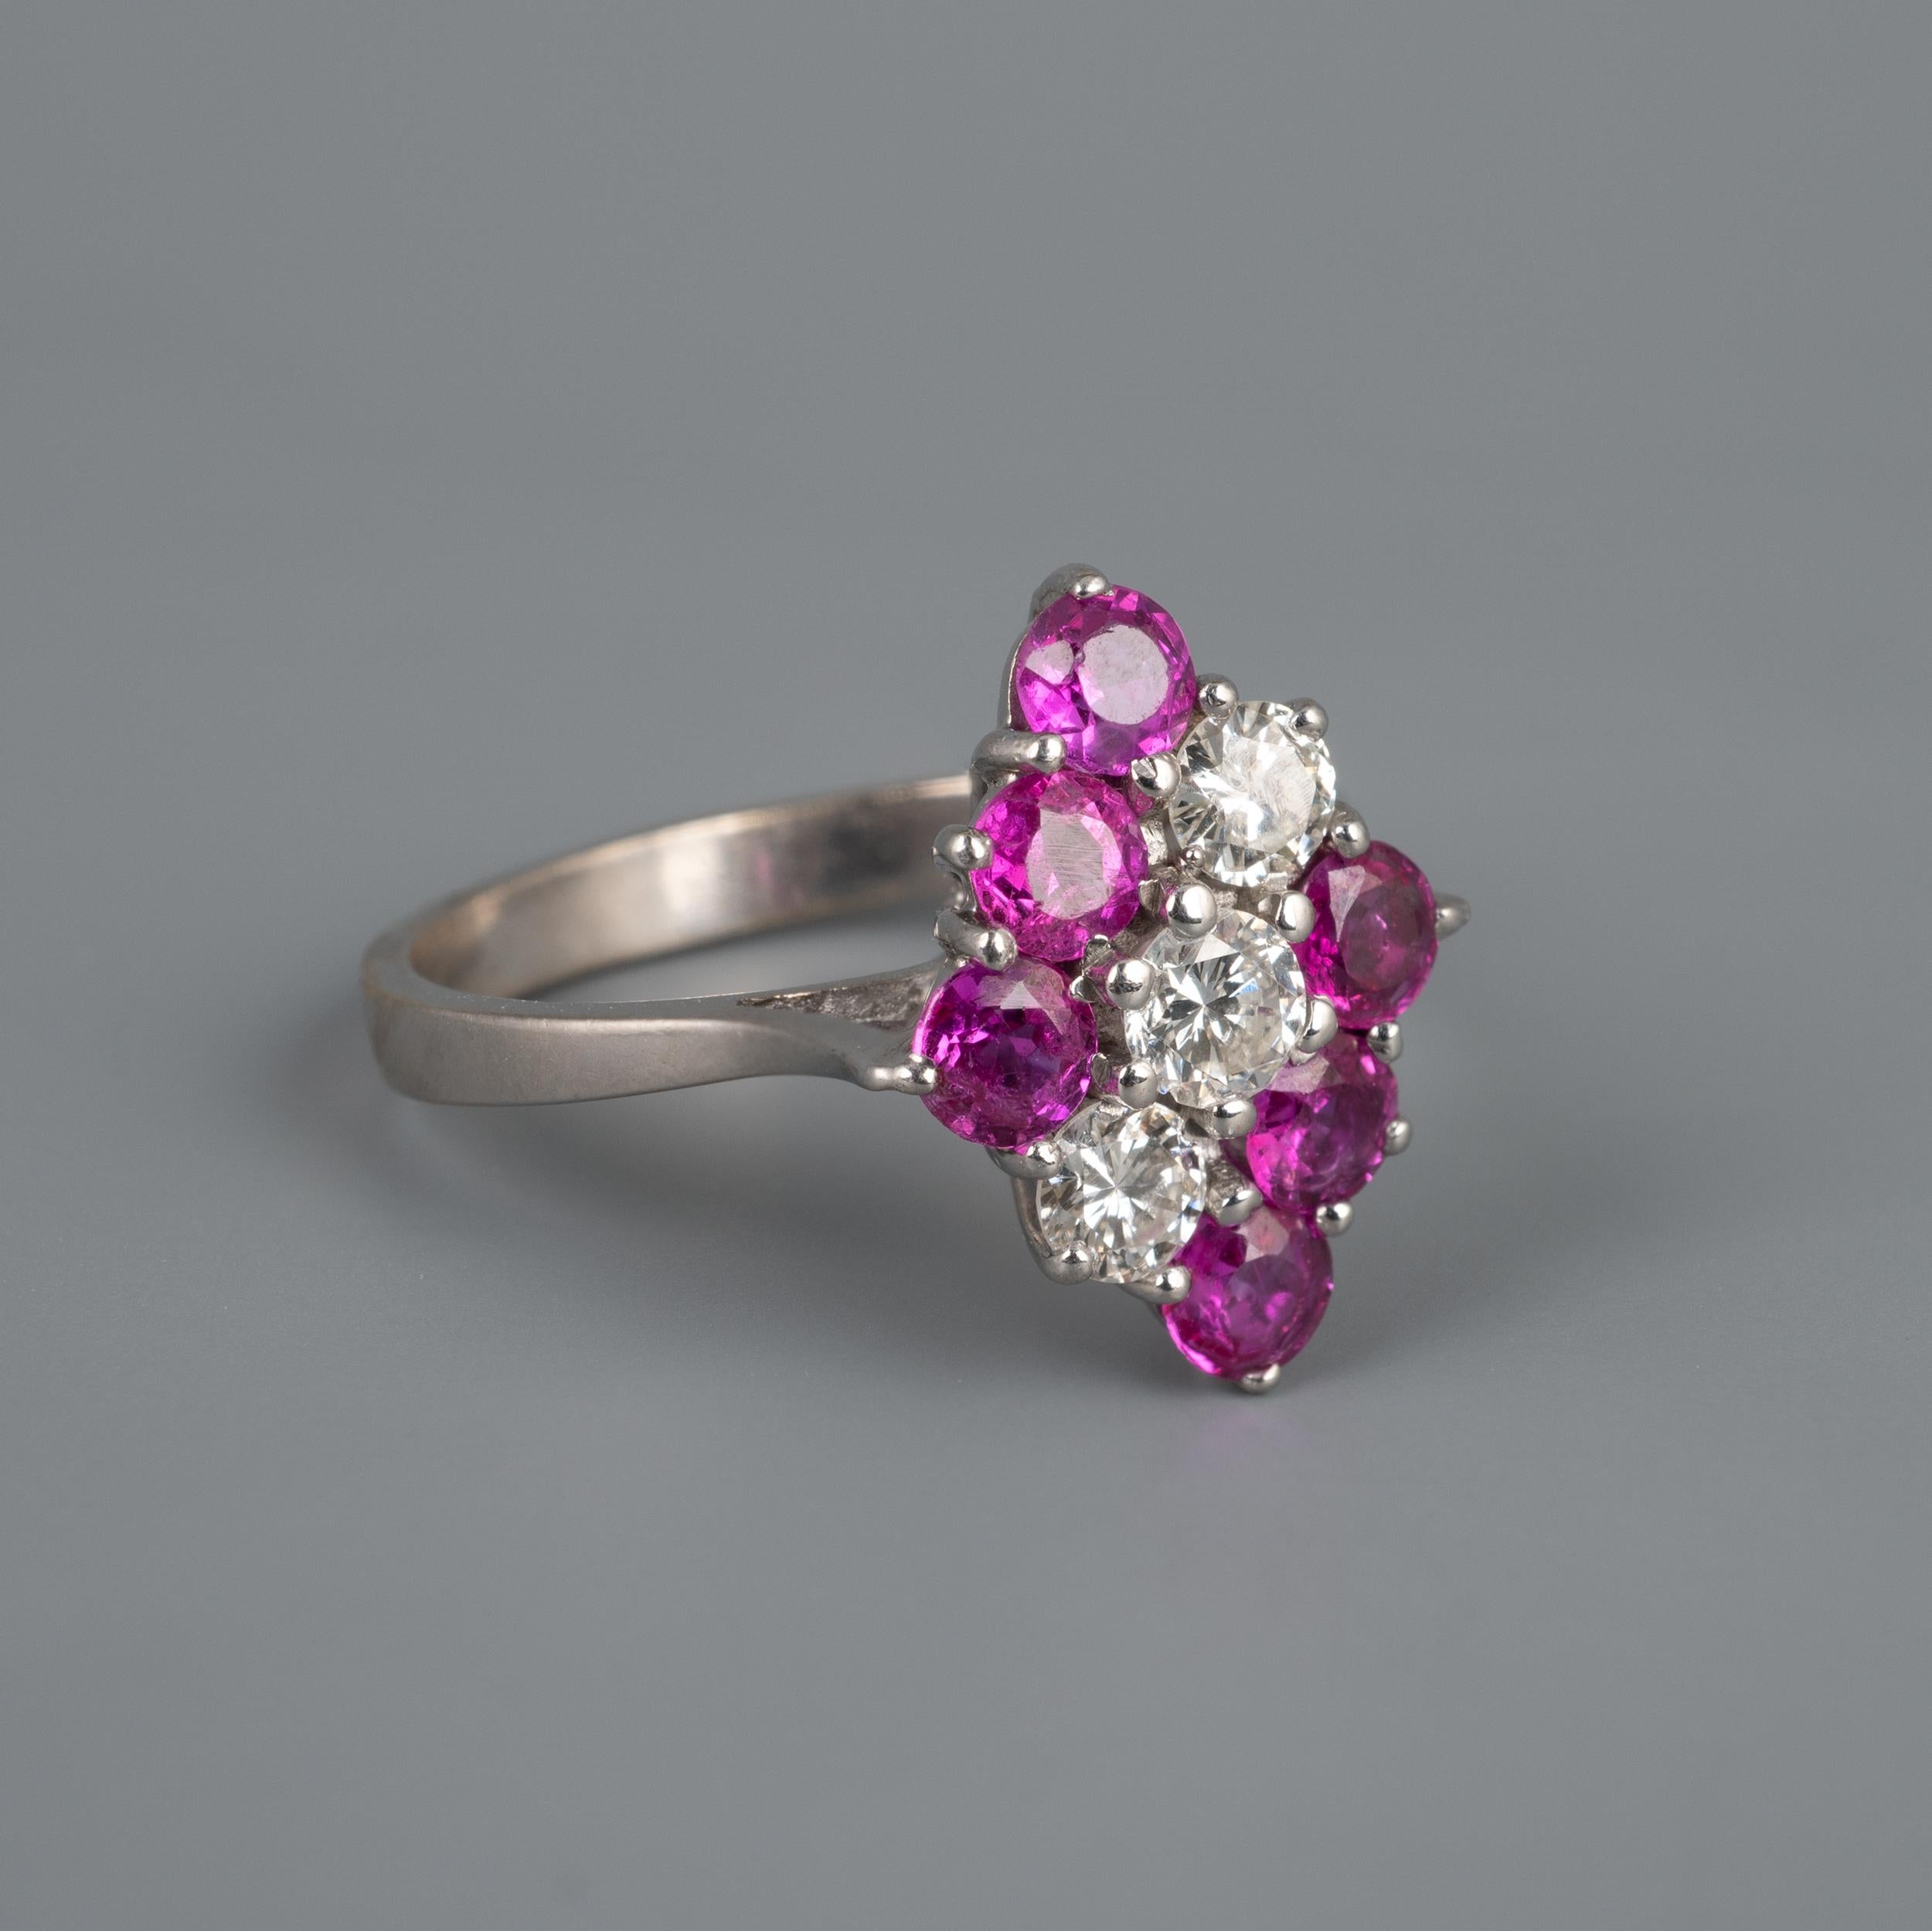 Pink Ruby and Diamond Statement Ring, 18 Karat White Gold, Certificate Included In Good Condition For Sale In Preston, Lancashire